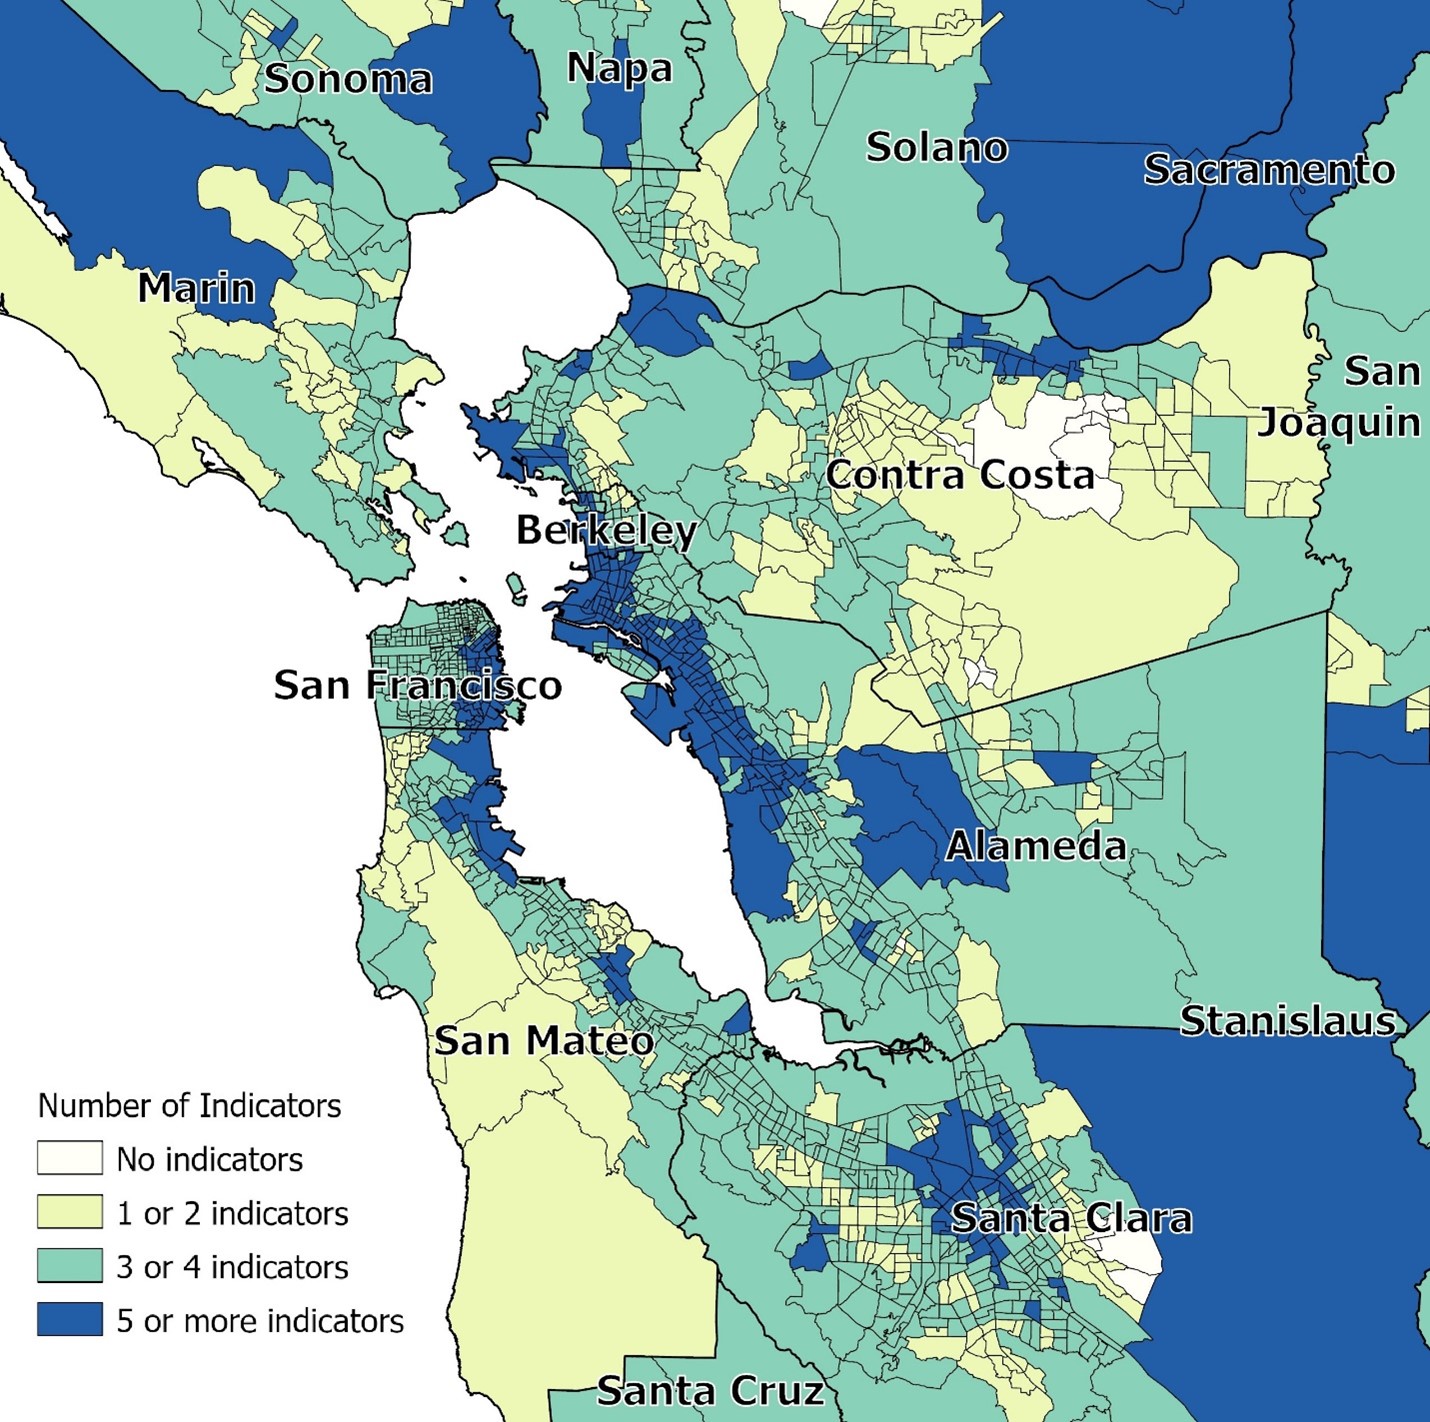 Map 3: Bay Area local health jurisdictions' census tracts by number of geospatial indicators of risk for childhood lead exposure